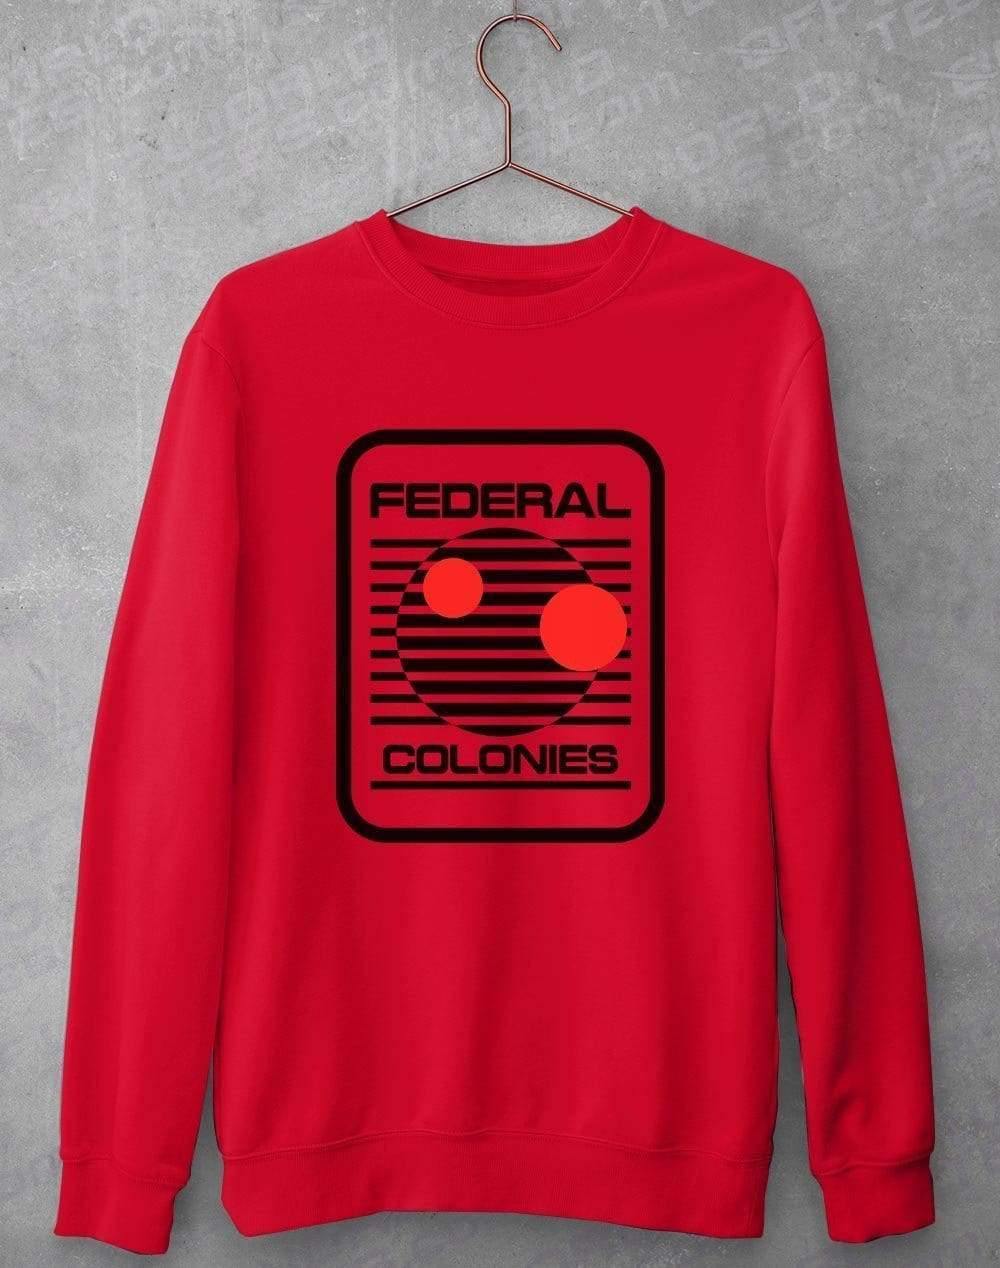 Federal Colonies Sweatshirt S / Fire Red  - Off World Tees